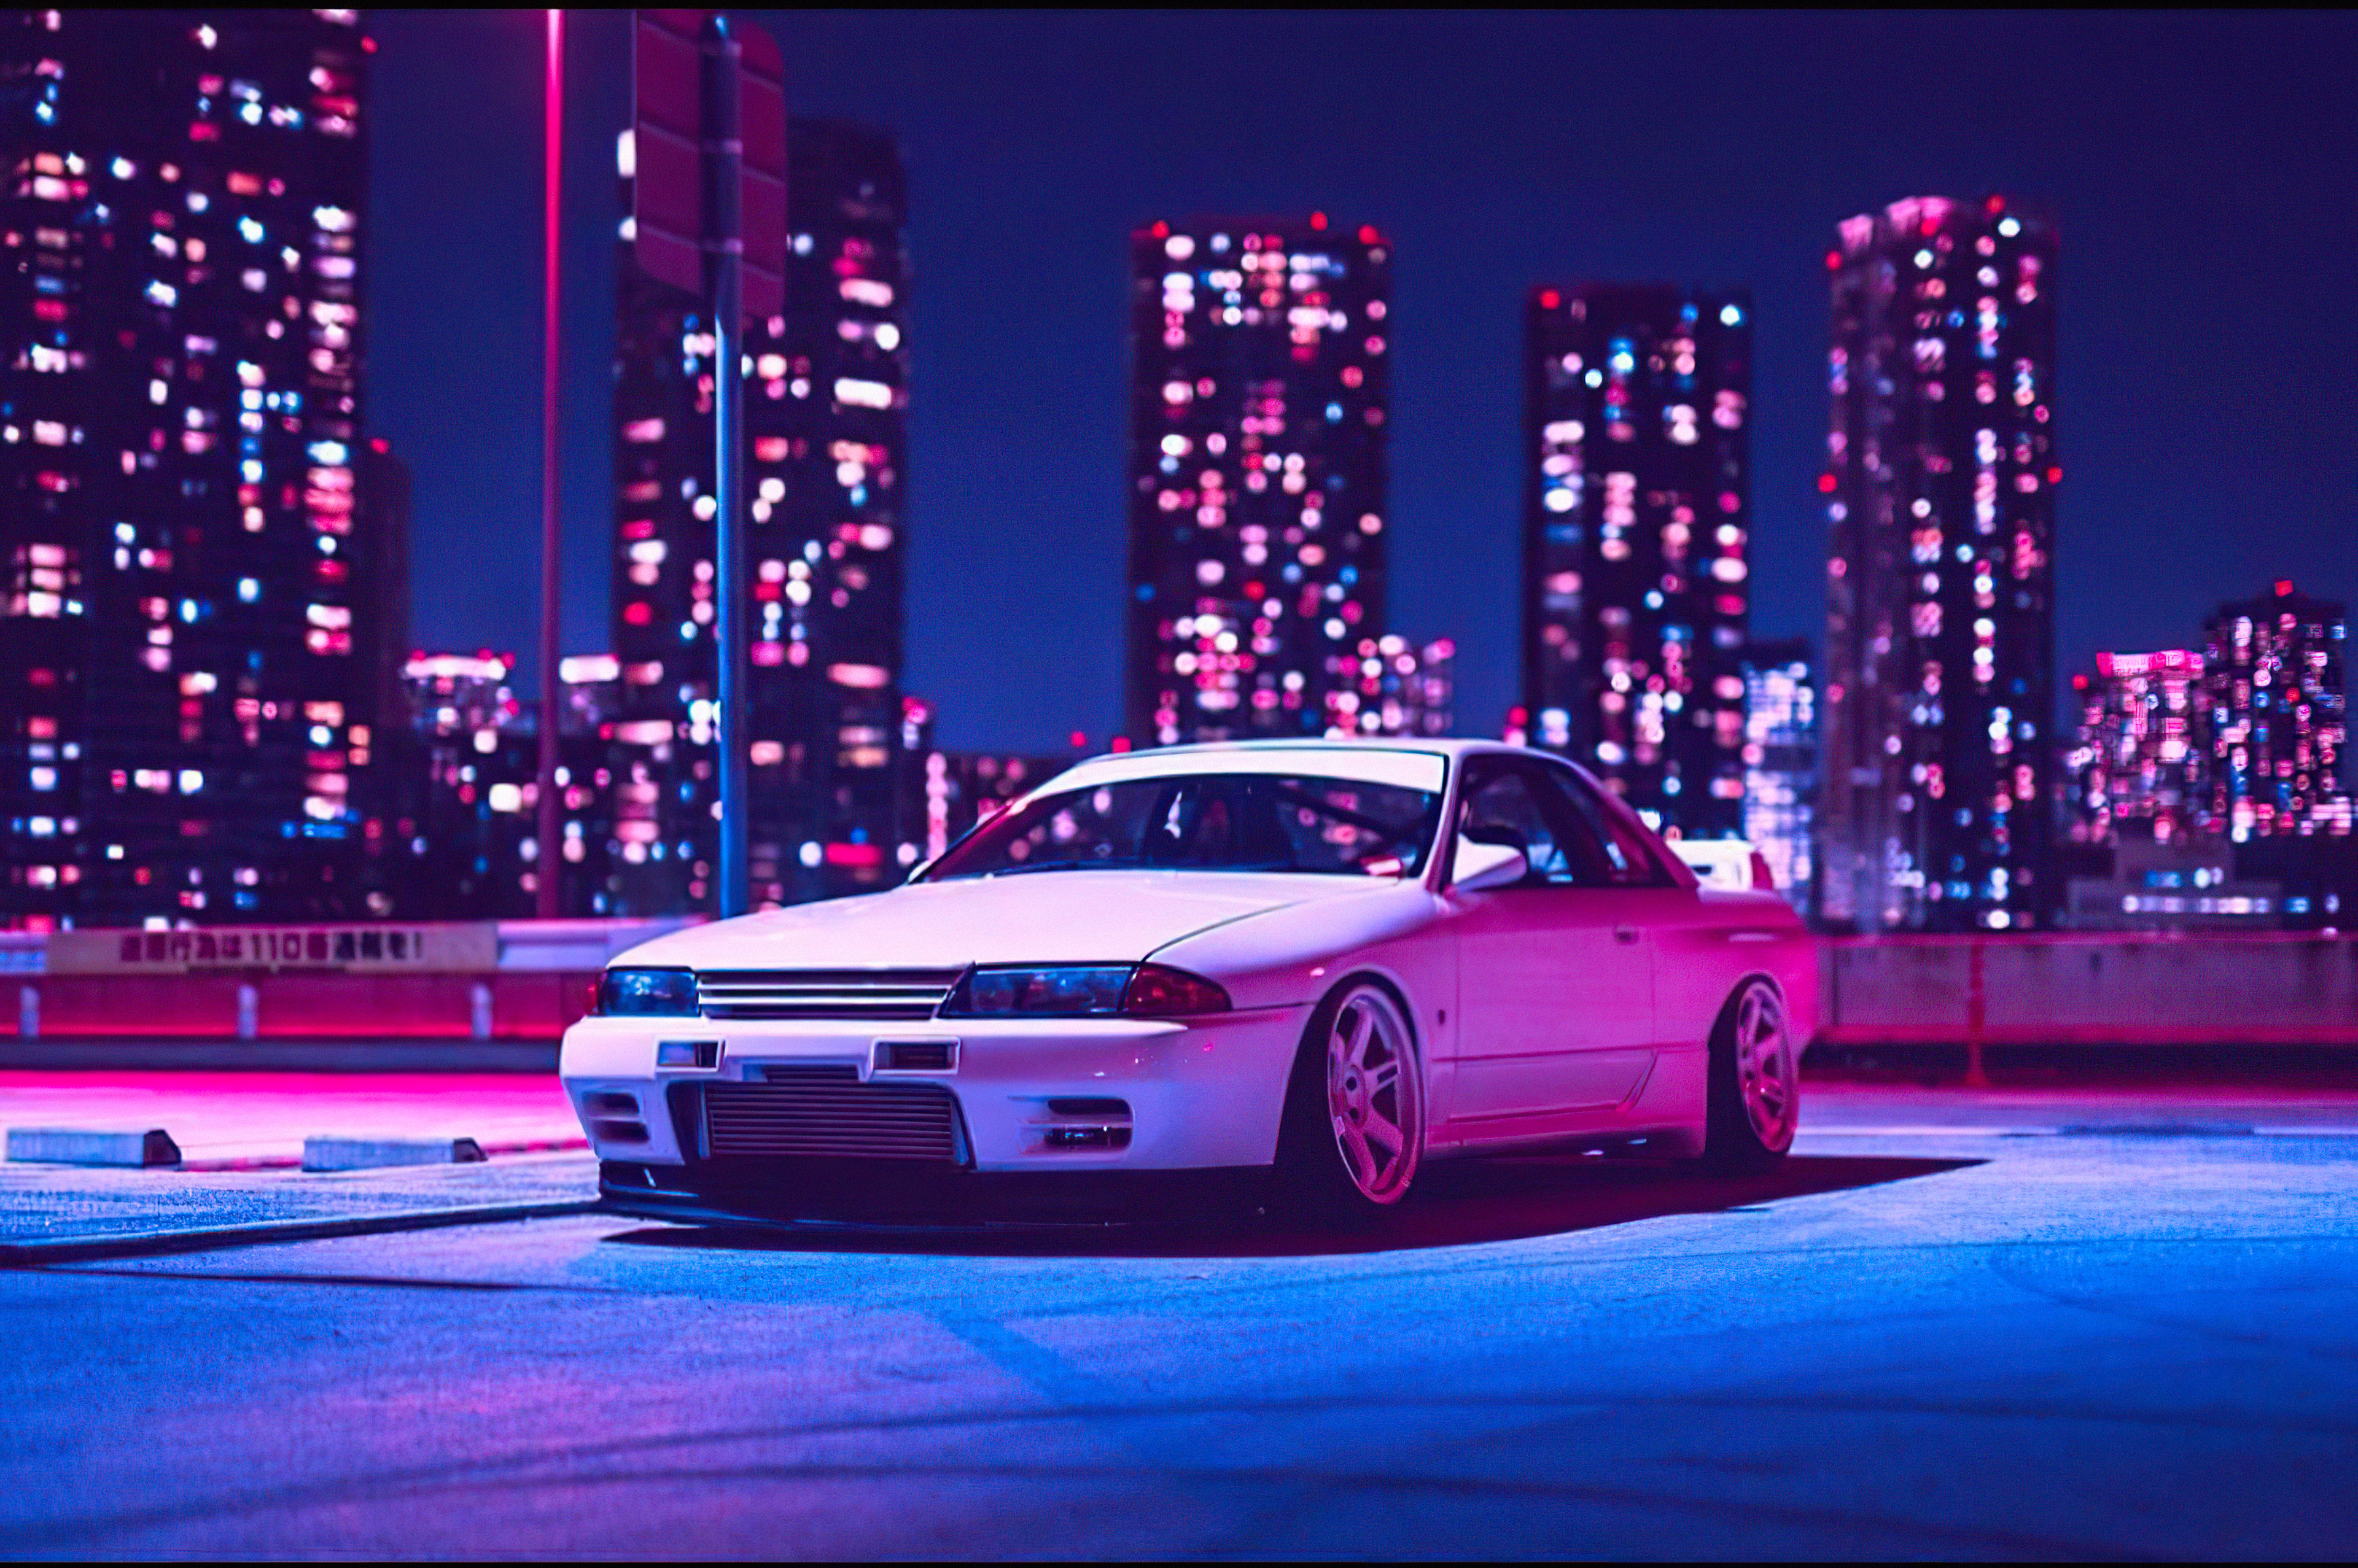 Nissan Skyline R32 Retrowave 4k Hd Cars 4k Wallpapers Images Backgrounds Photos And Pictures